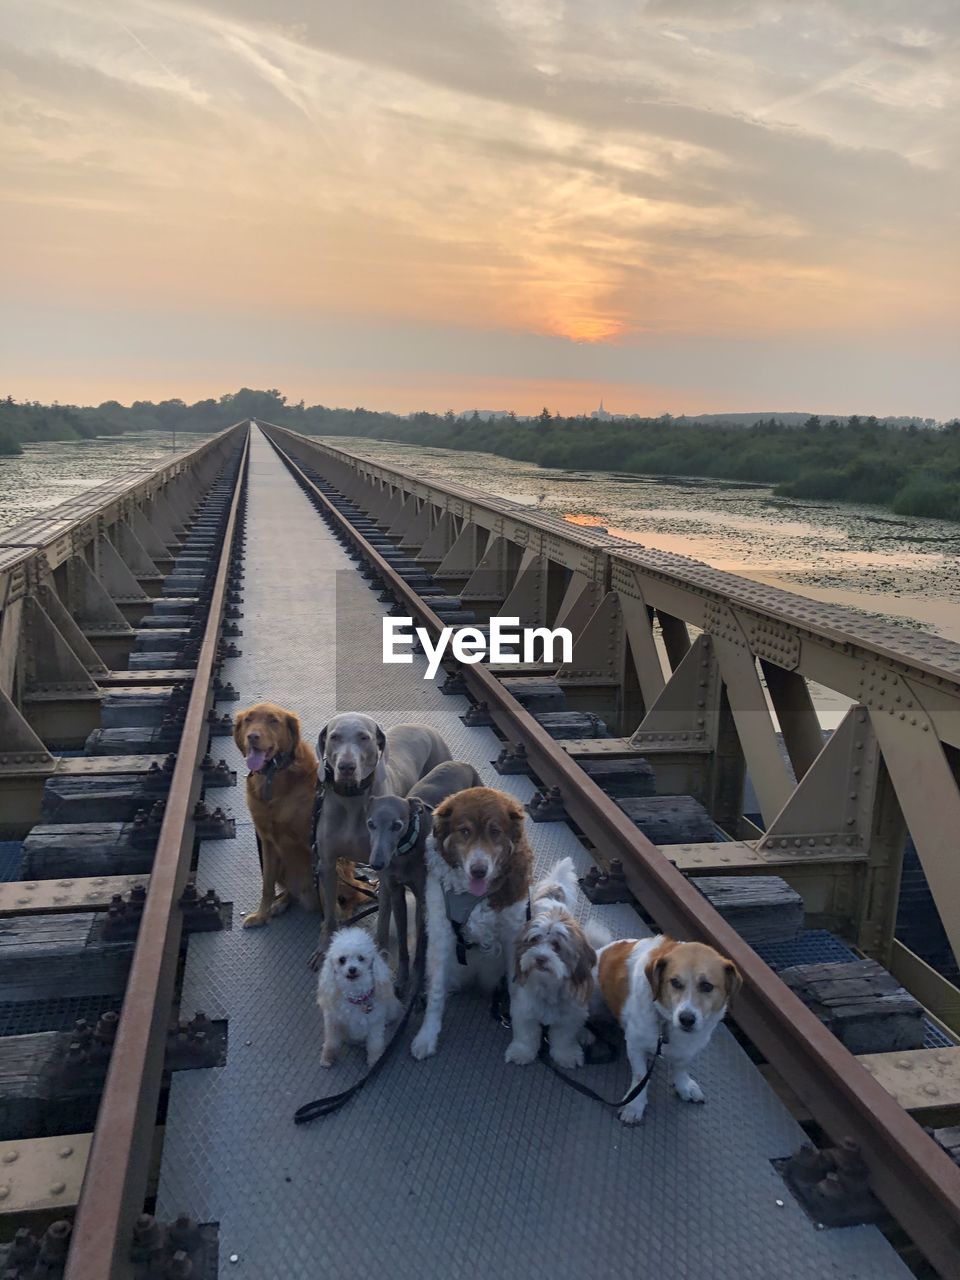 VIEW OF DOGS AT RAILROAD STATION